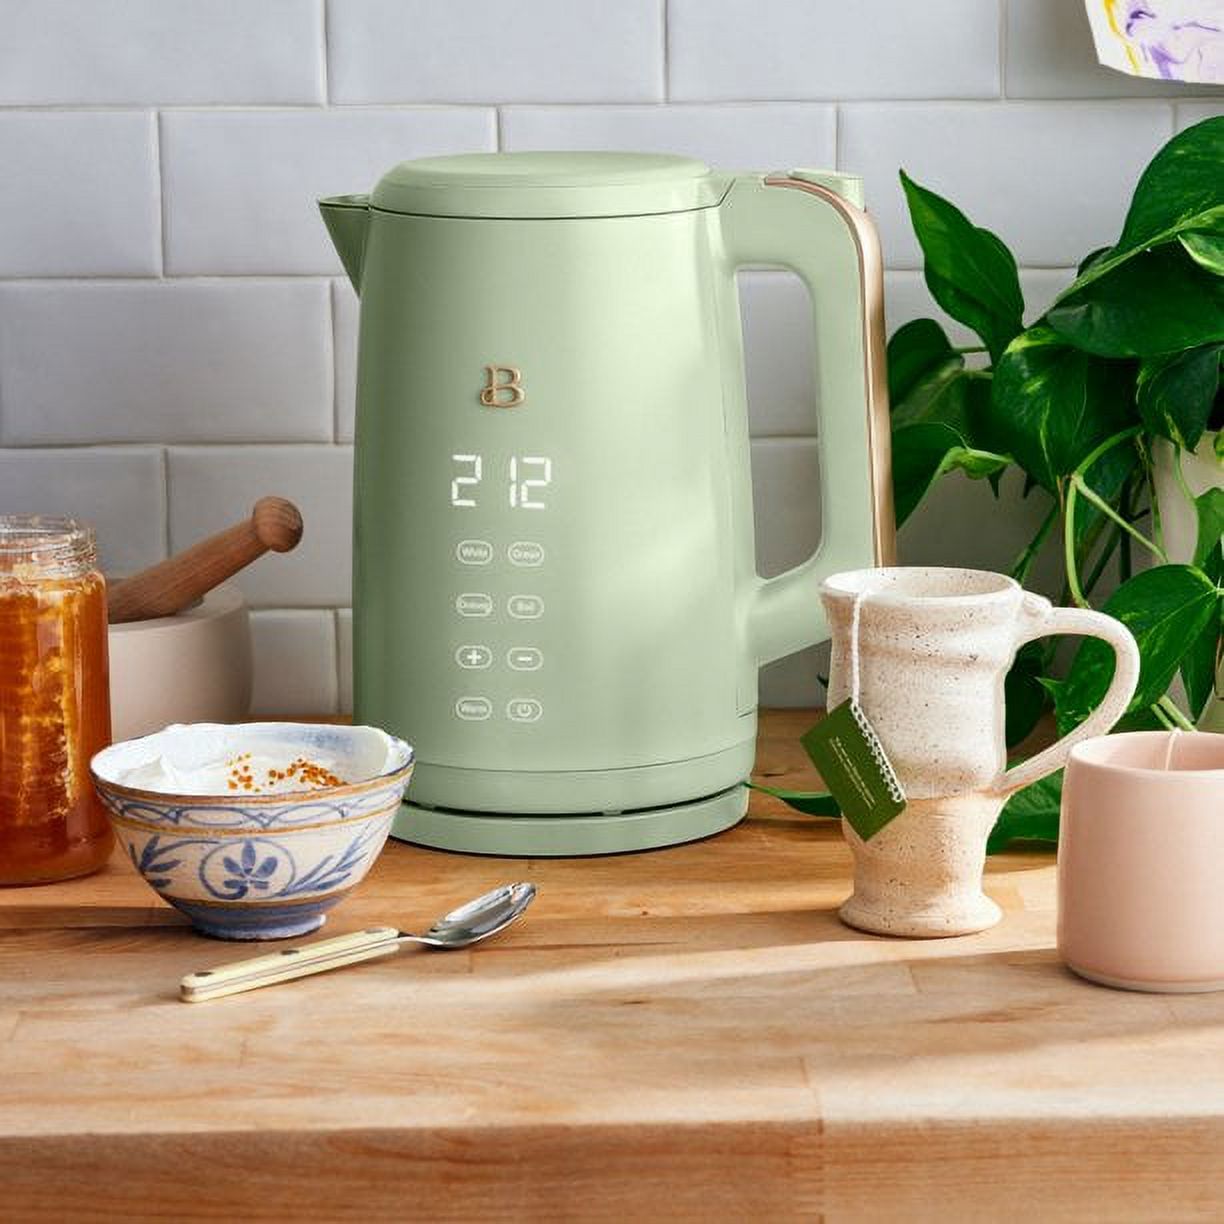 Beautiful 1.7-Liter Electric Kettle 1500 W with One-Touch Activation, Sage Green by Drew Barrymore - image 2 of 8